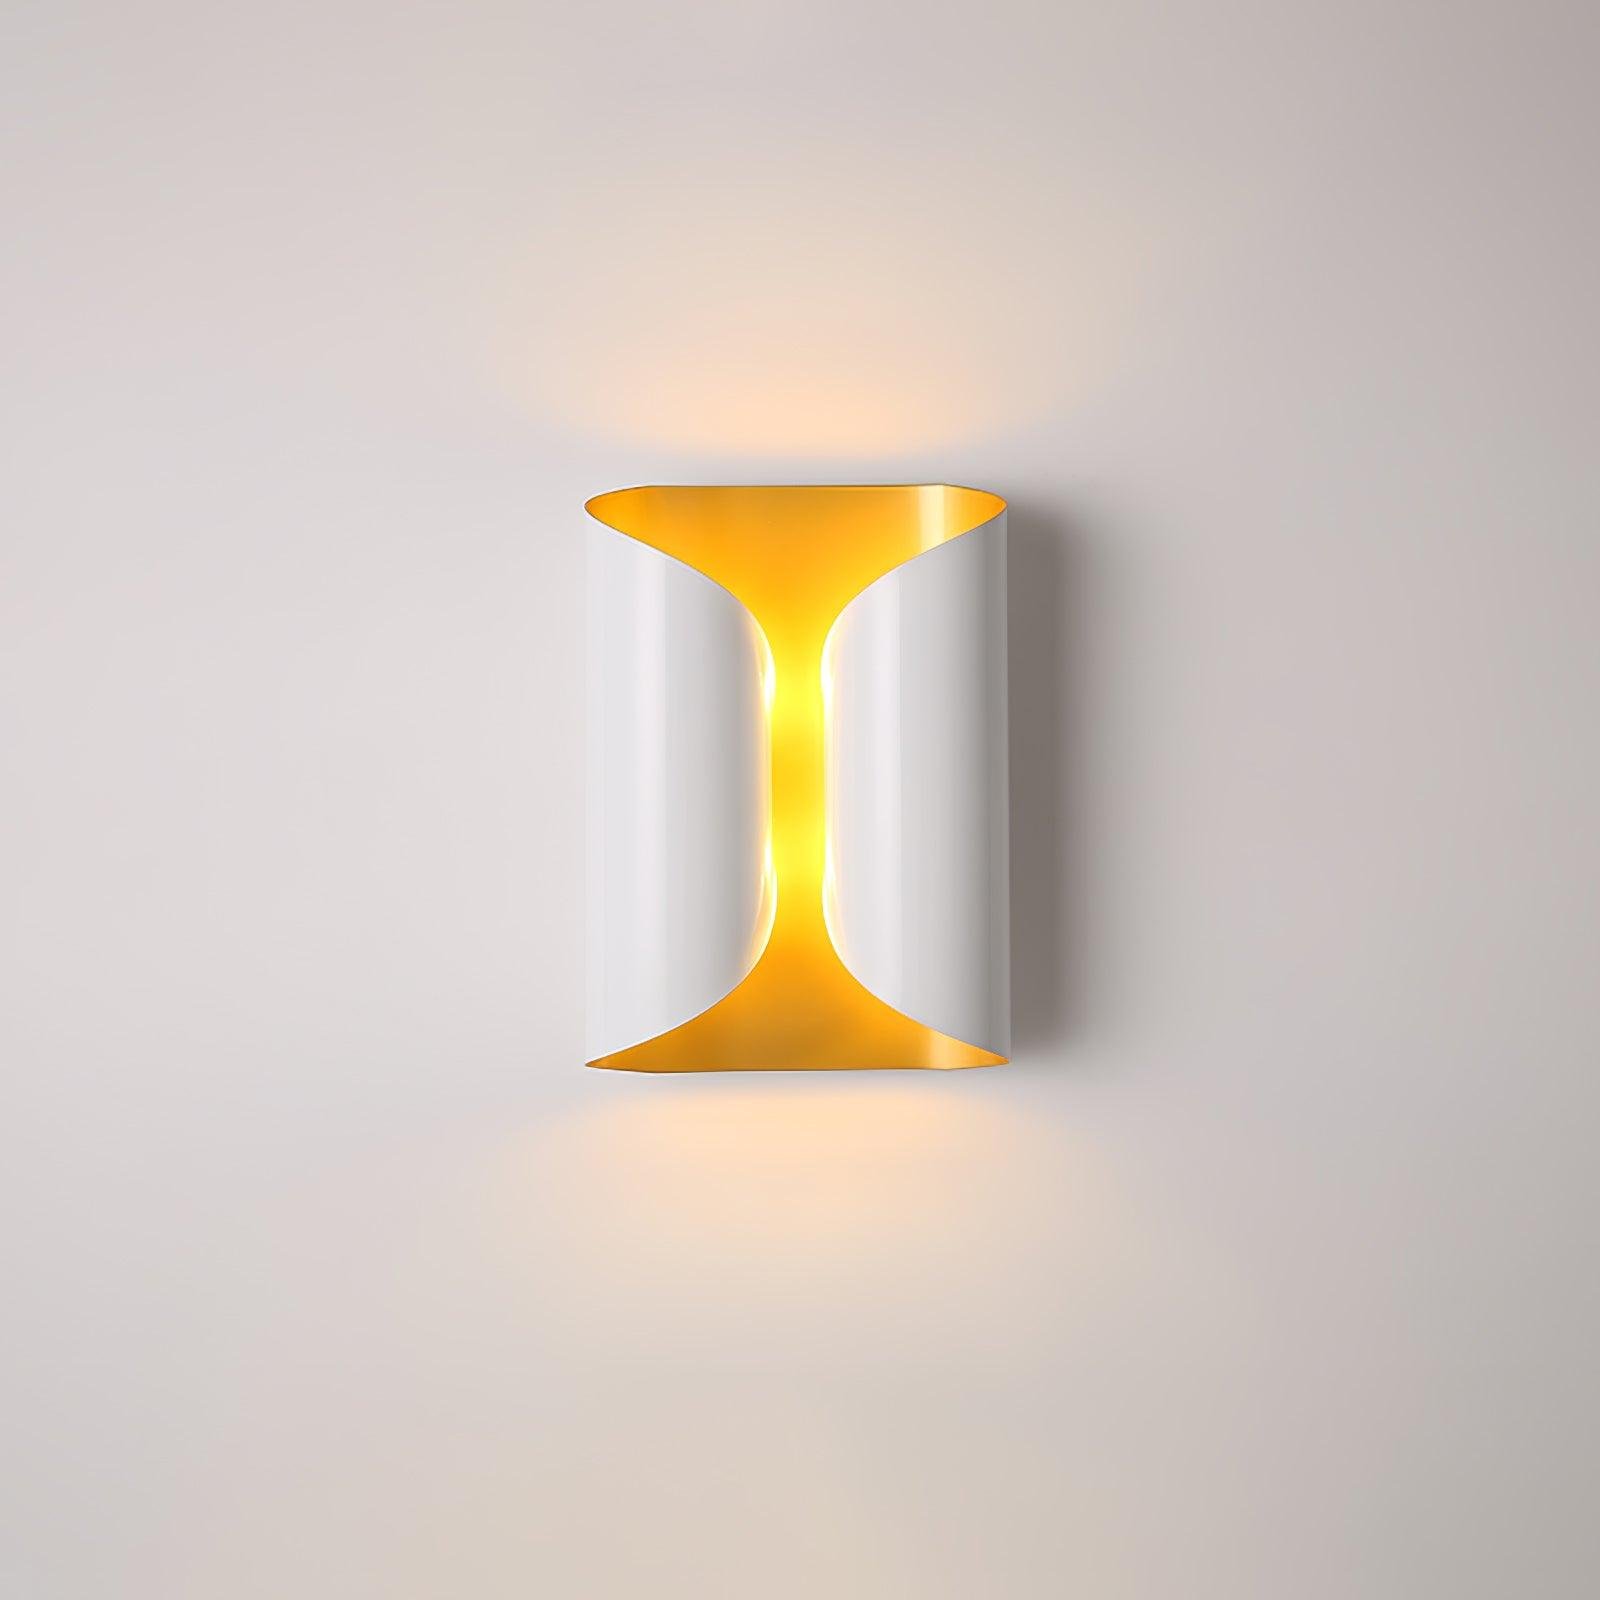 Lux Wall Light in White/Gold, measuring W 7.1″ x H 10.8″ or W 18cm x H 27.5cm